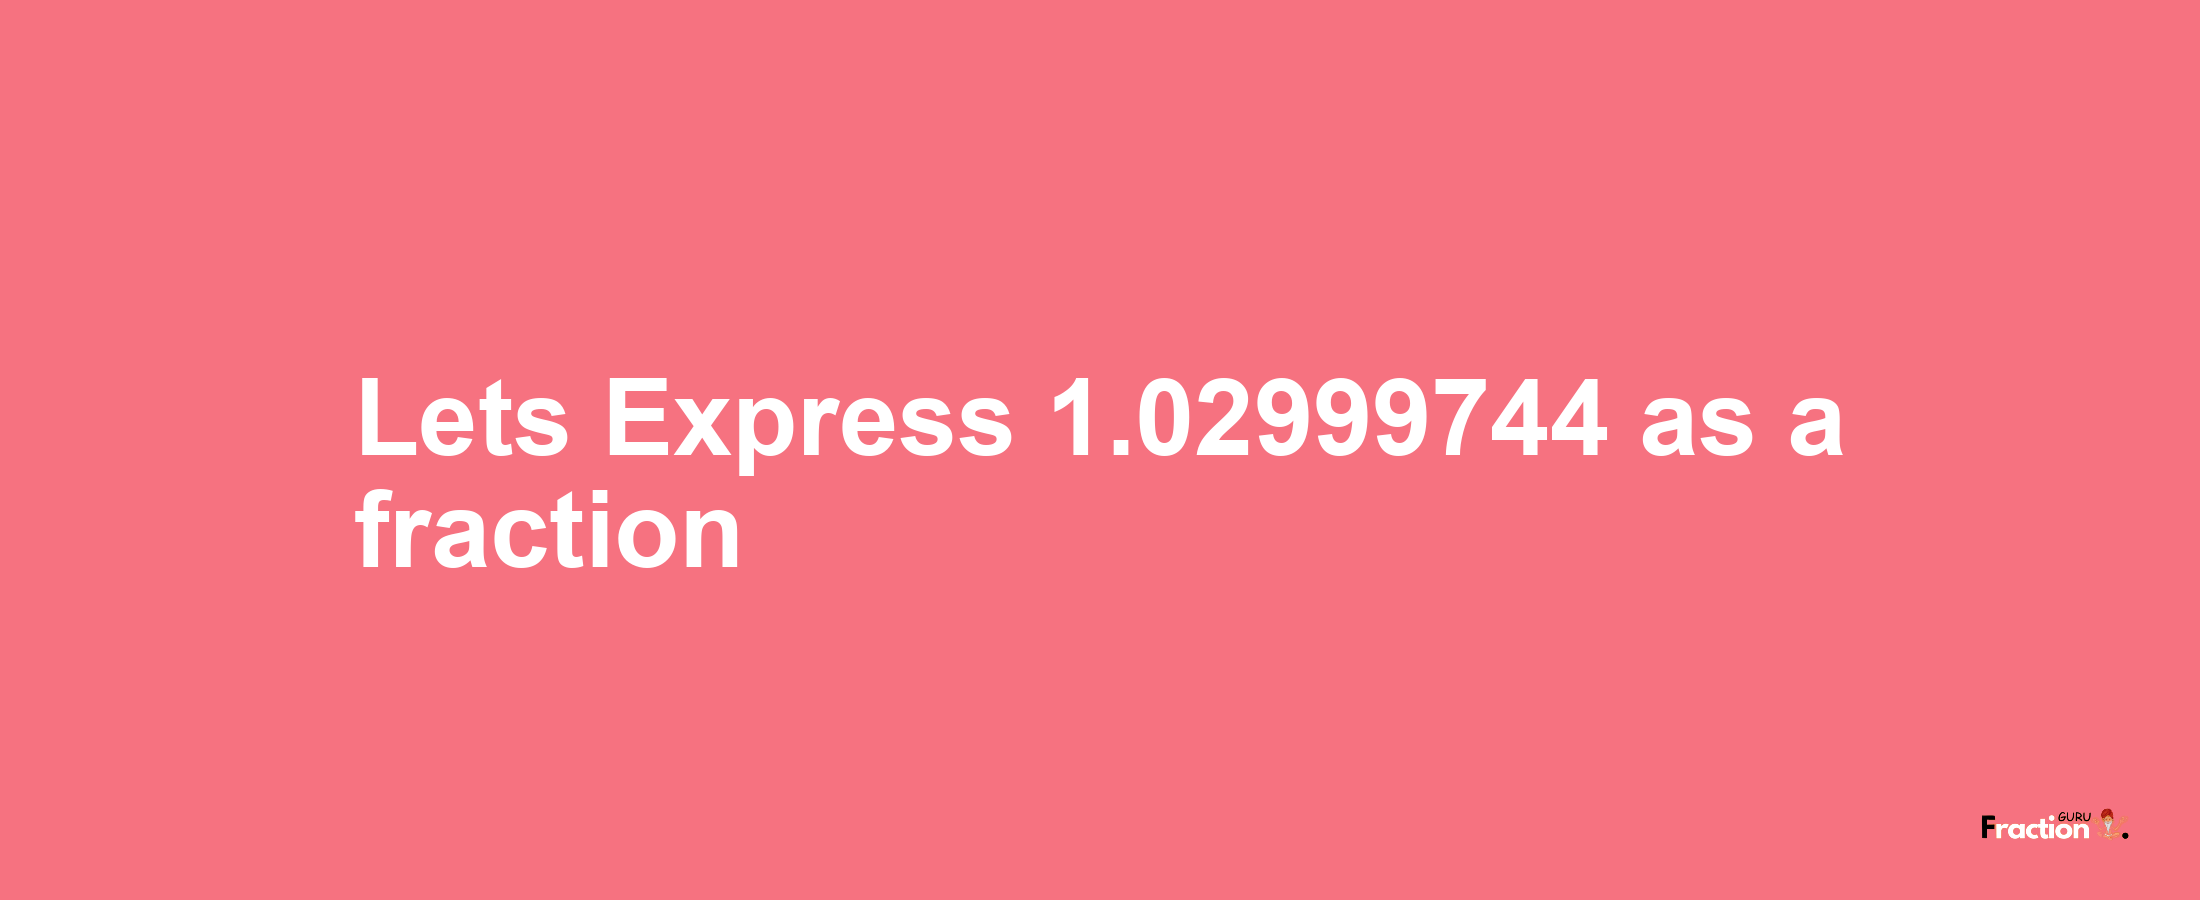 Lets Express 1.02999744 as afraction